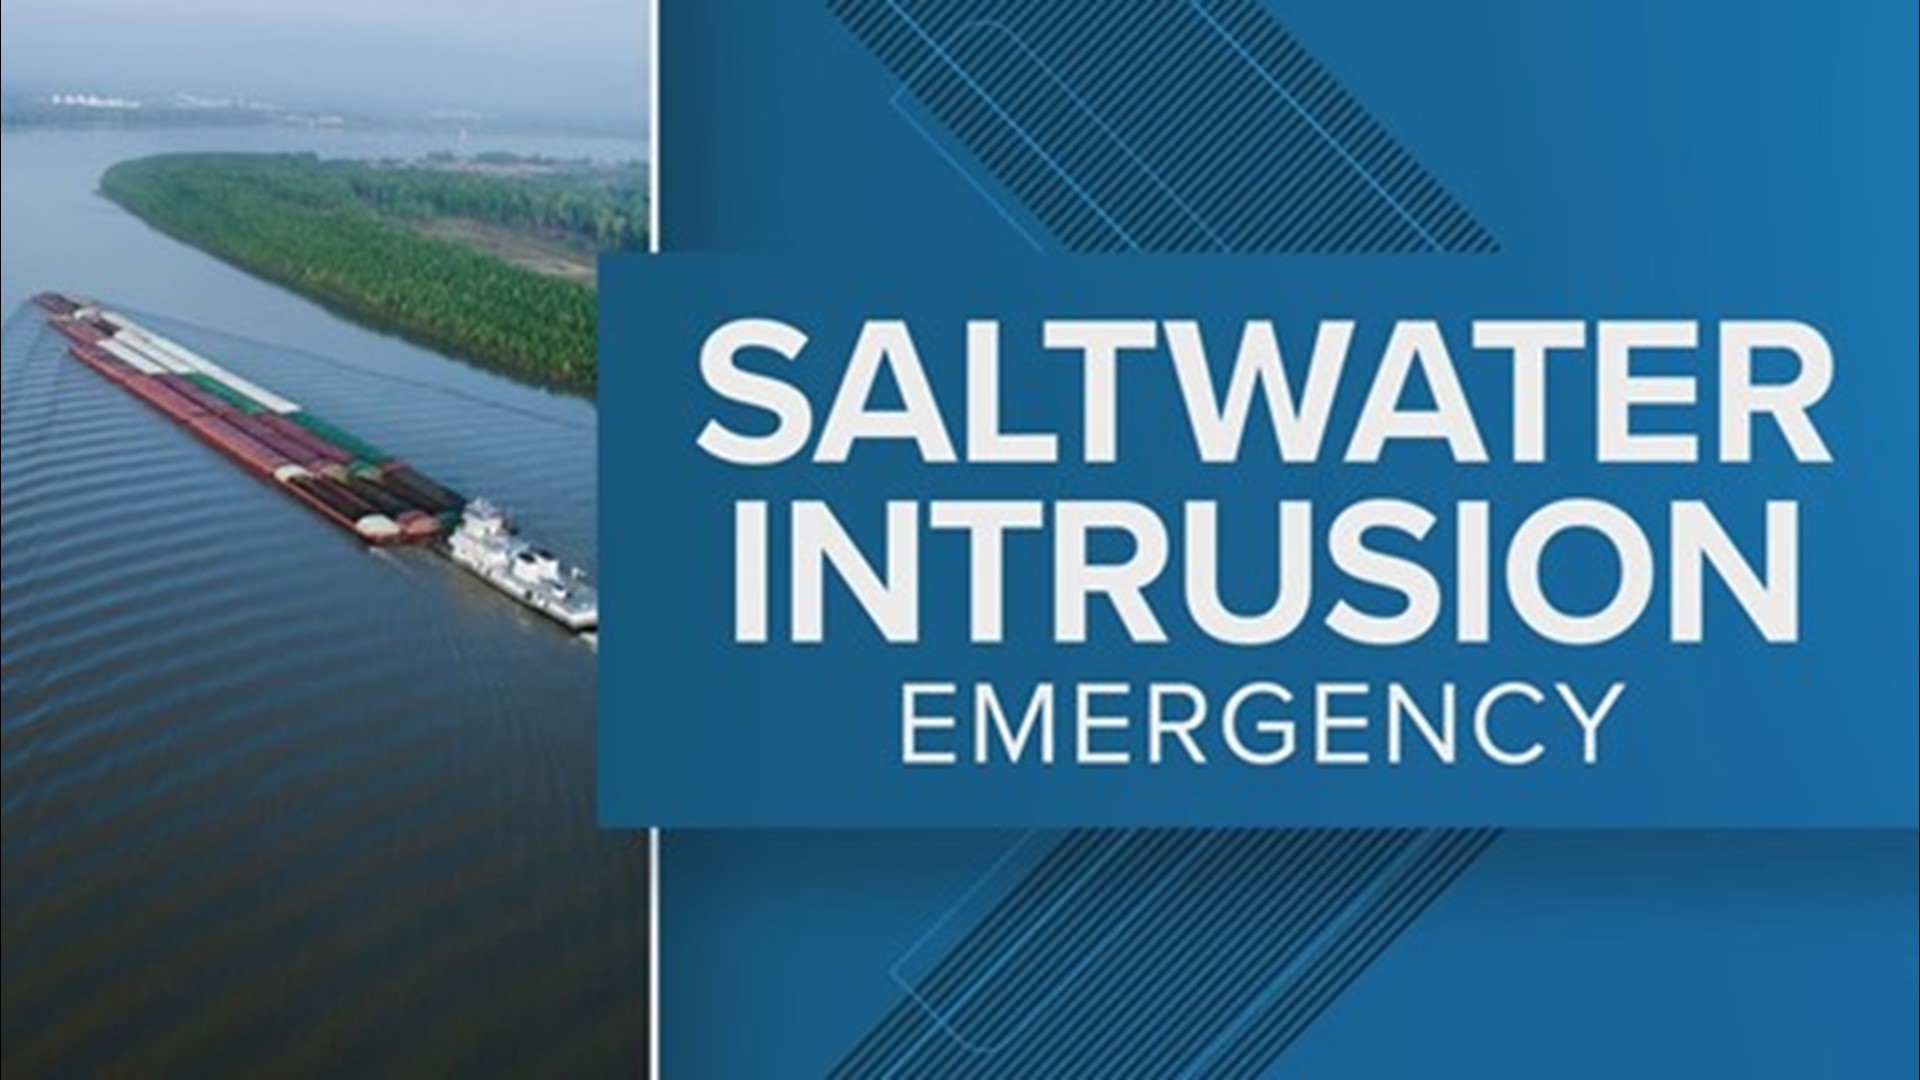 Lily Cummings has some questions and answers about the saltwater wedge making its way up the Mississippi River and impacting drinking water.